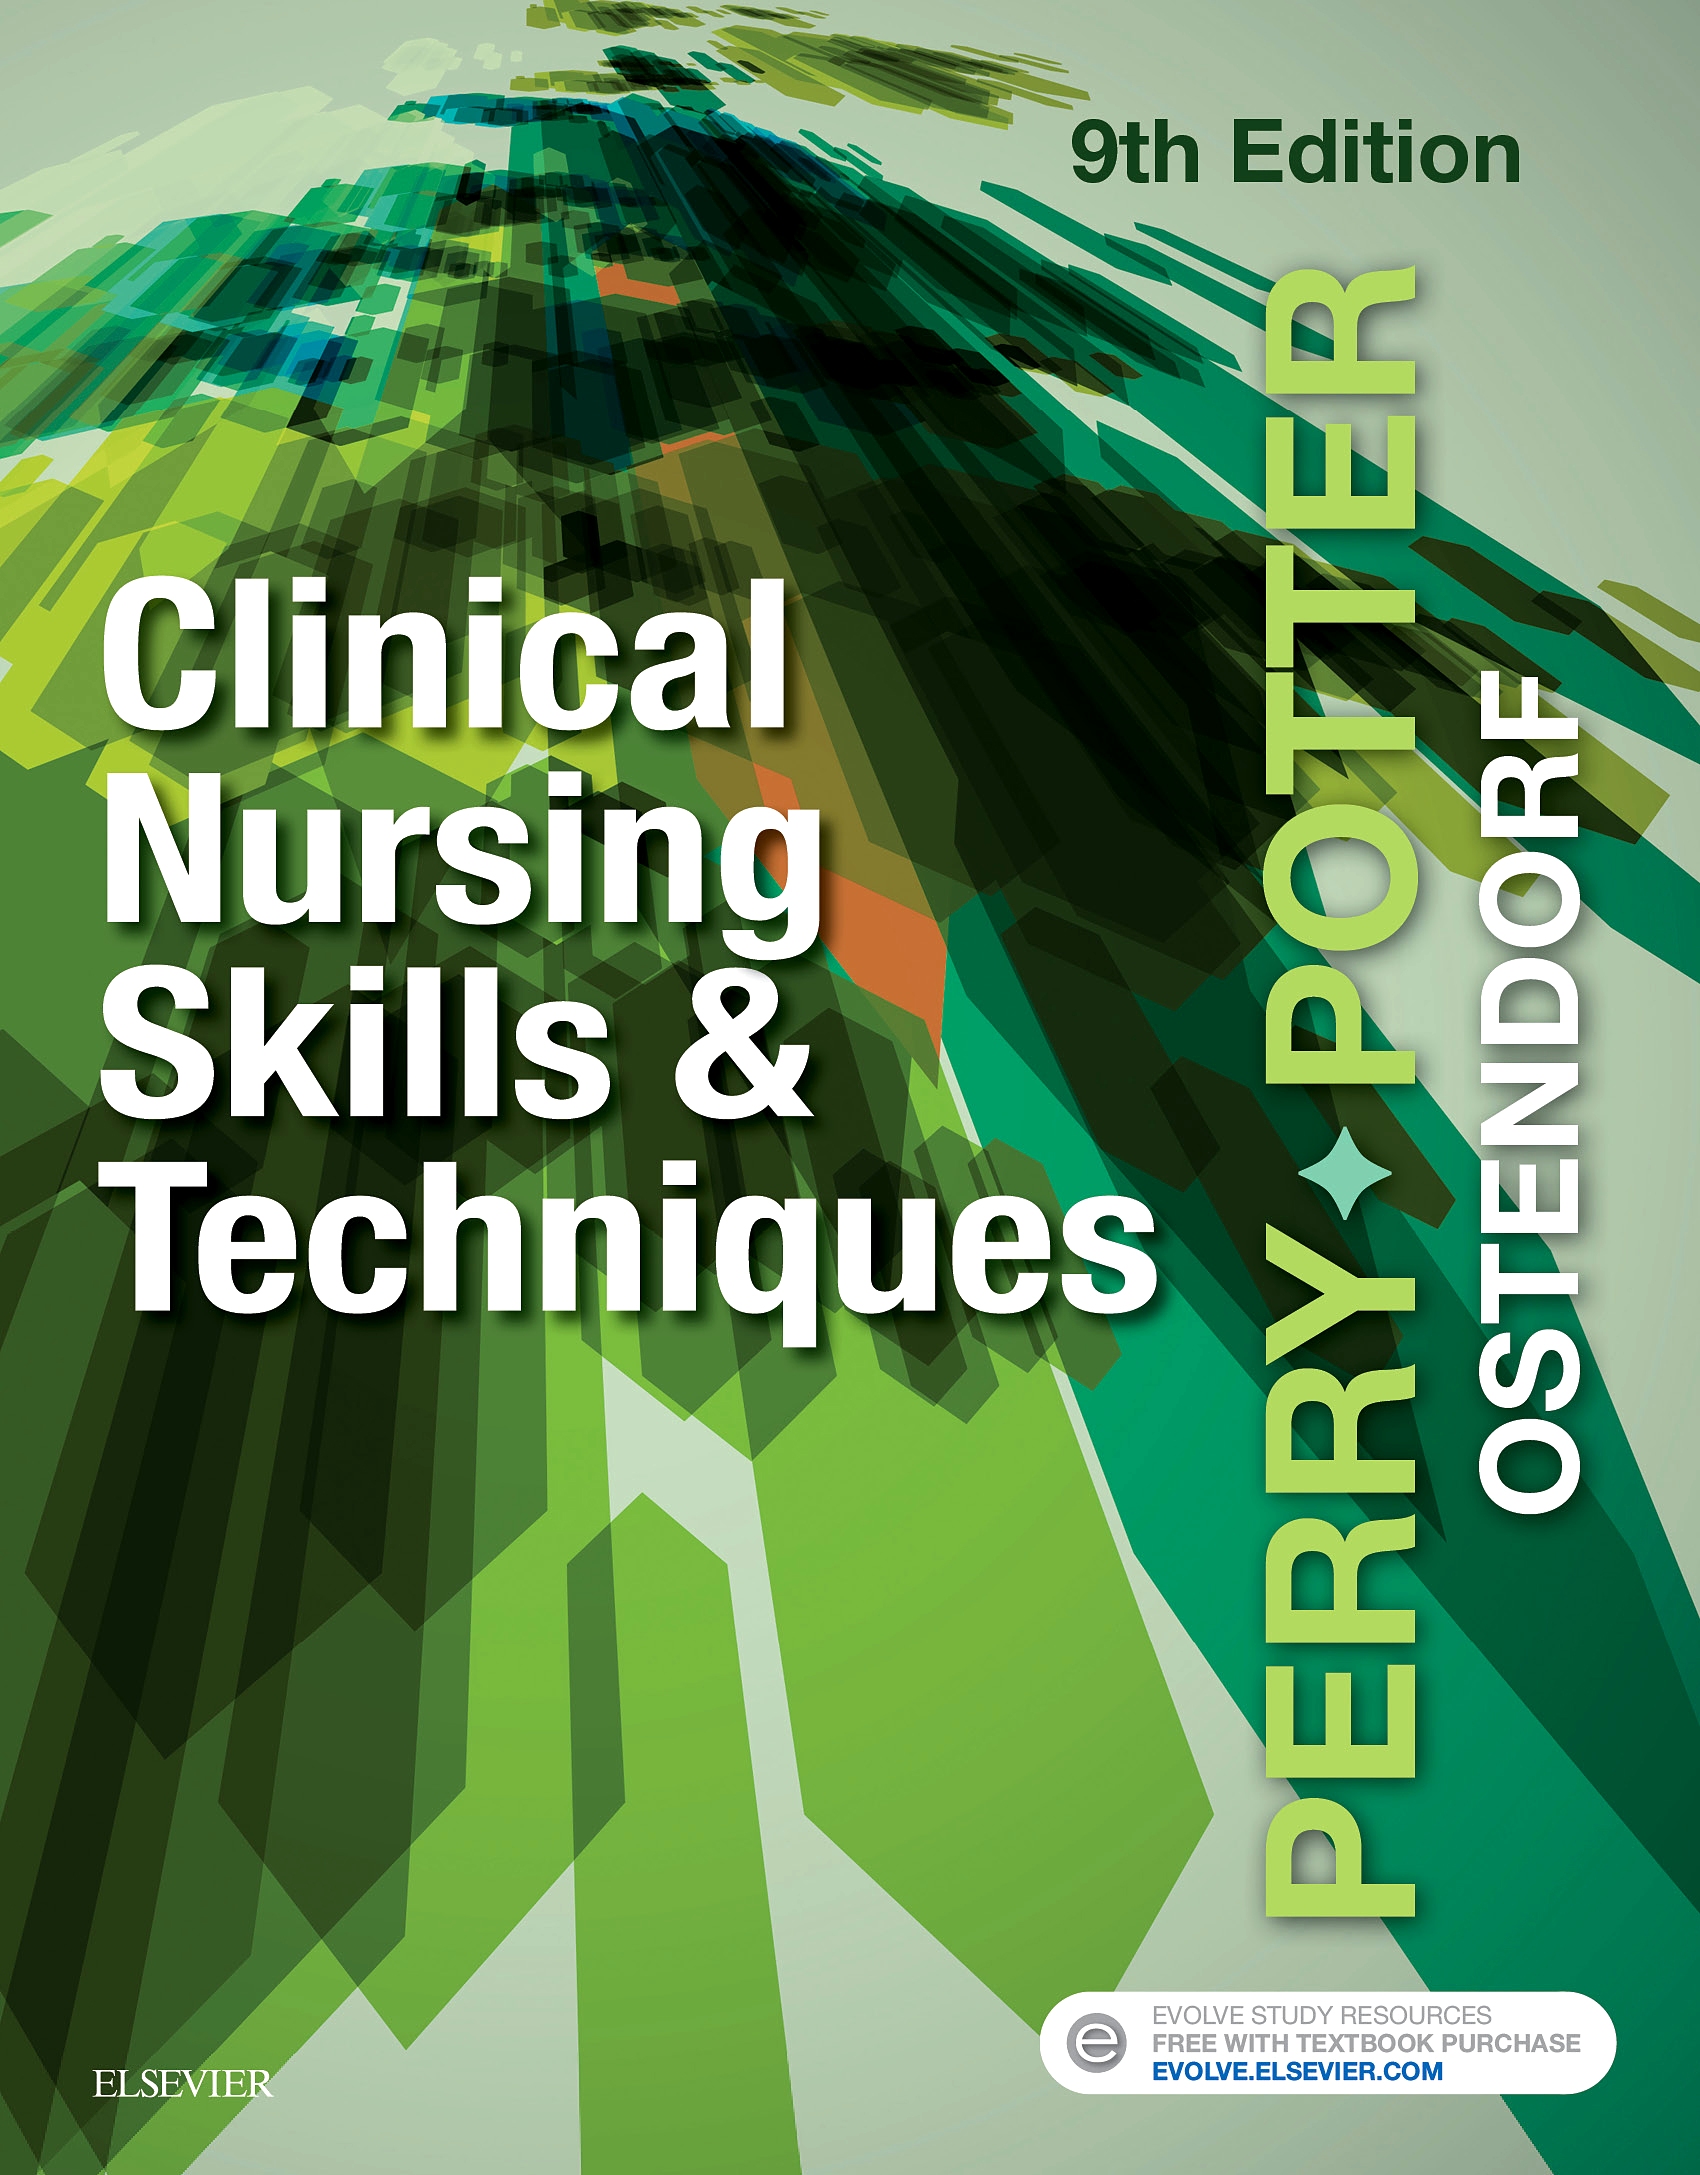 Evolve Resources for Clinical Nursing Skills and Techniques, 9th Edition